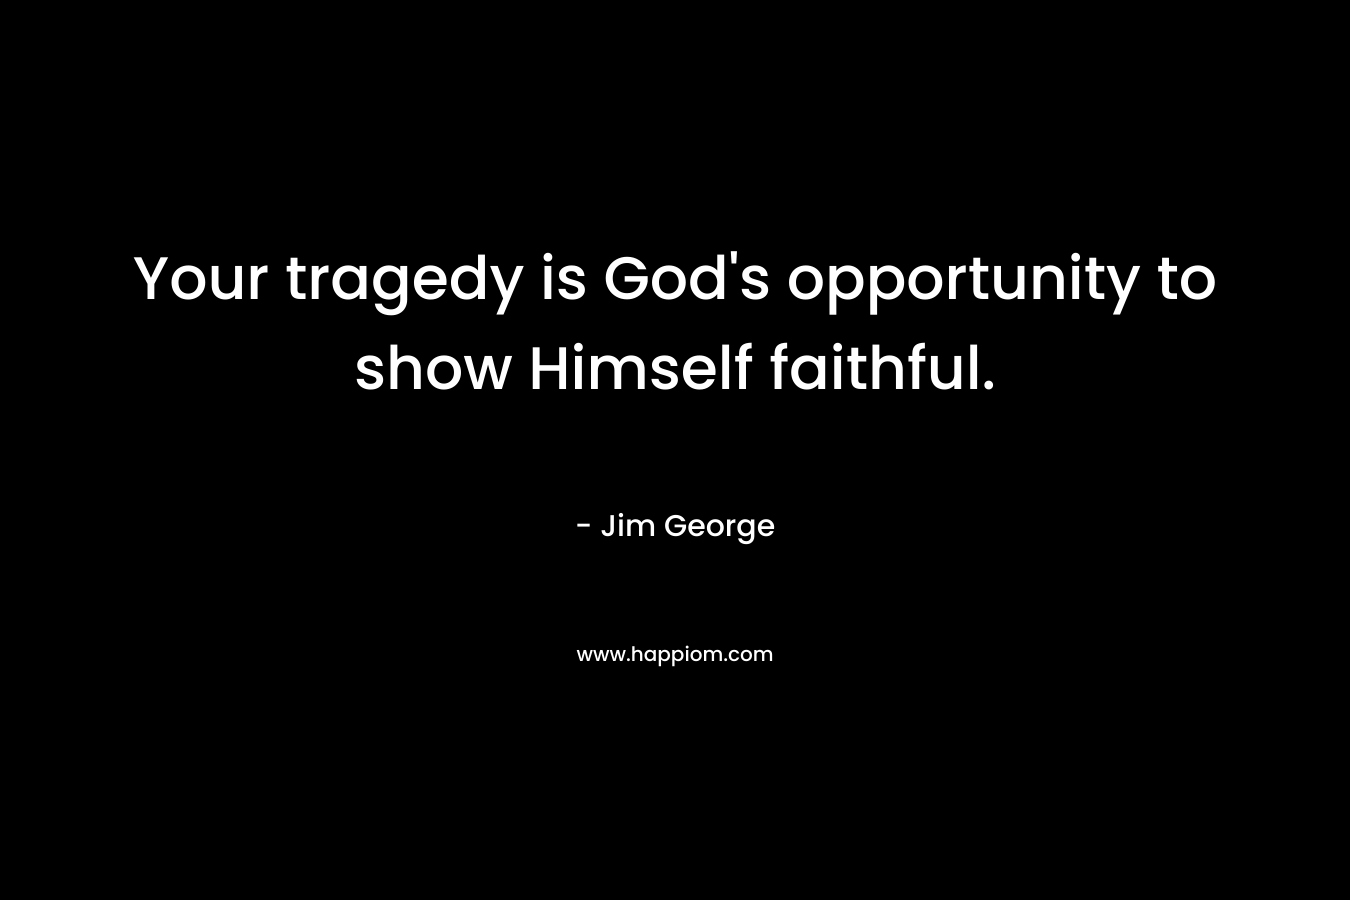 Your tragedy is God's opportunity to show Himself faithful.